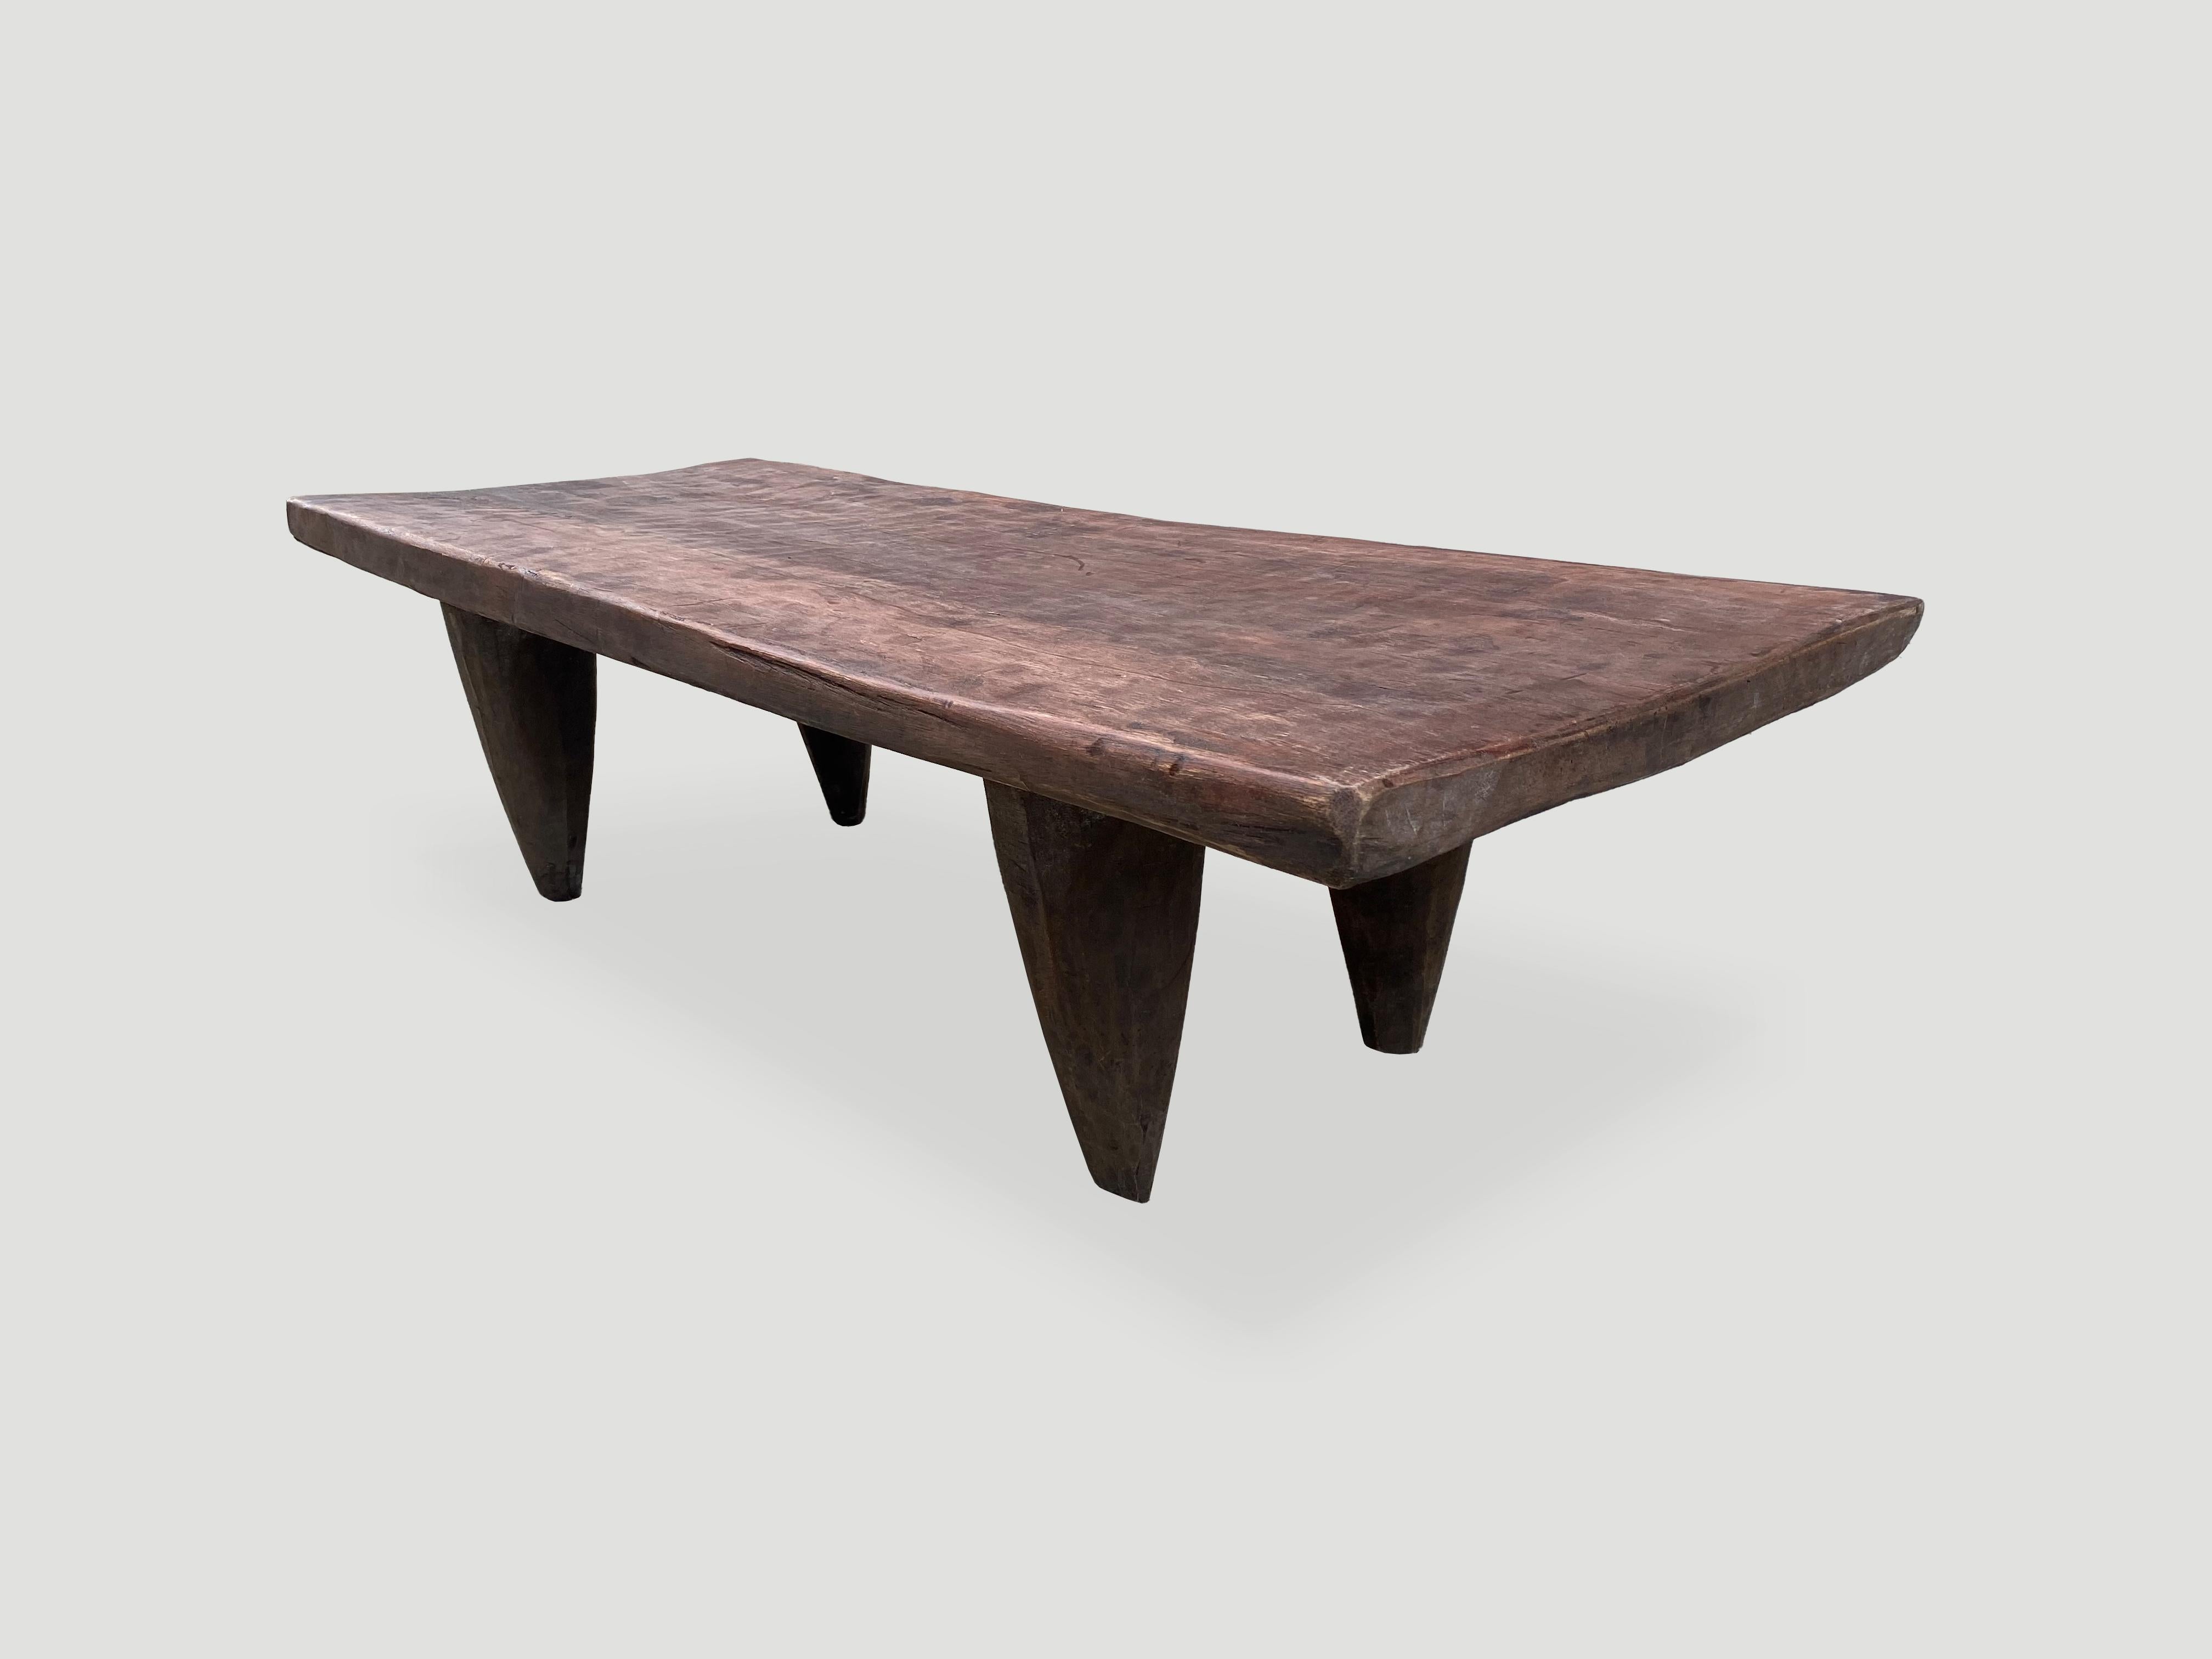 Antique coffee table or bench hand carved by the Senufo tribes from a single block of iroko wood, native to the west coast of Africa. The wood is tough, dense and very durable. Shown with cone style legs and with a two inch thick top. An unusual